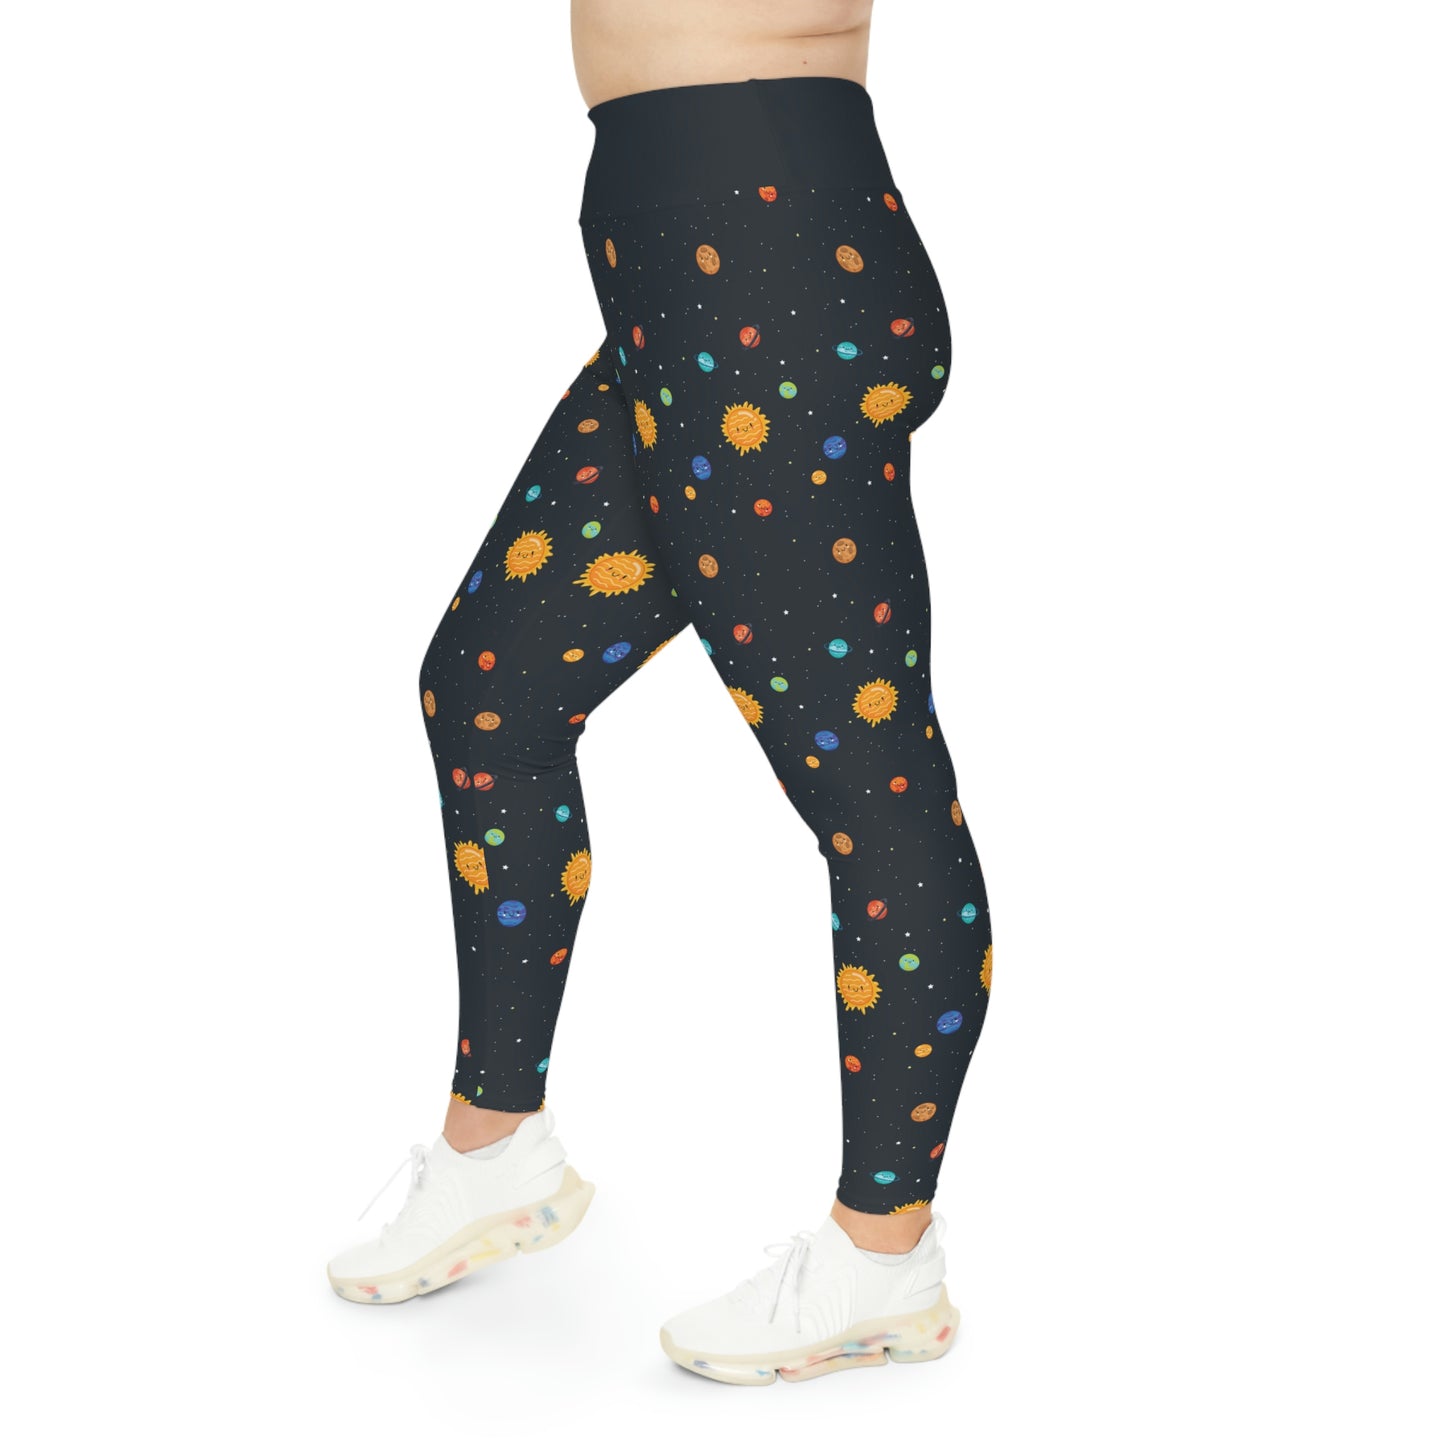 Planet Sun Moon Plus Size Leggings One of a Kind Gift - Unique Workout Activewear tights for Mom fitness, Mothers Day, Girlfriend Christmas Gift